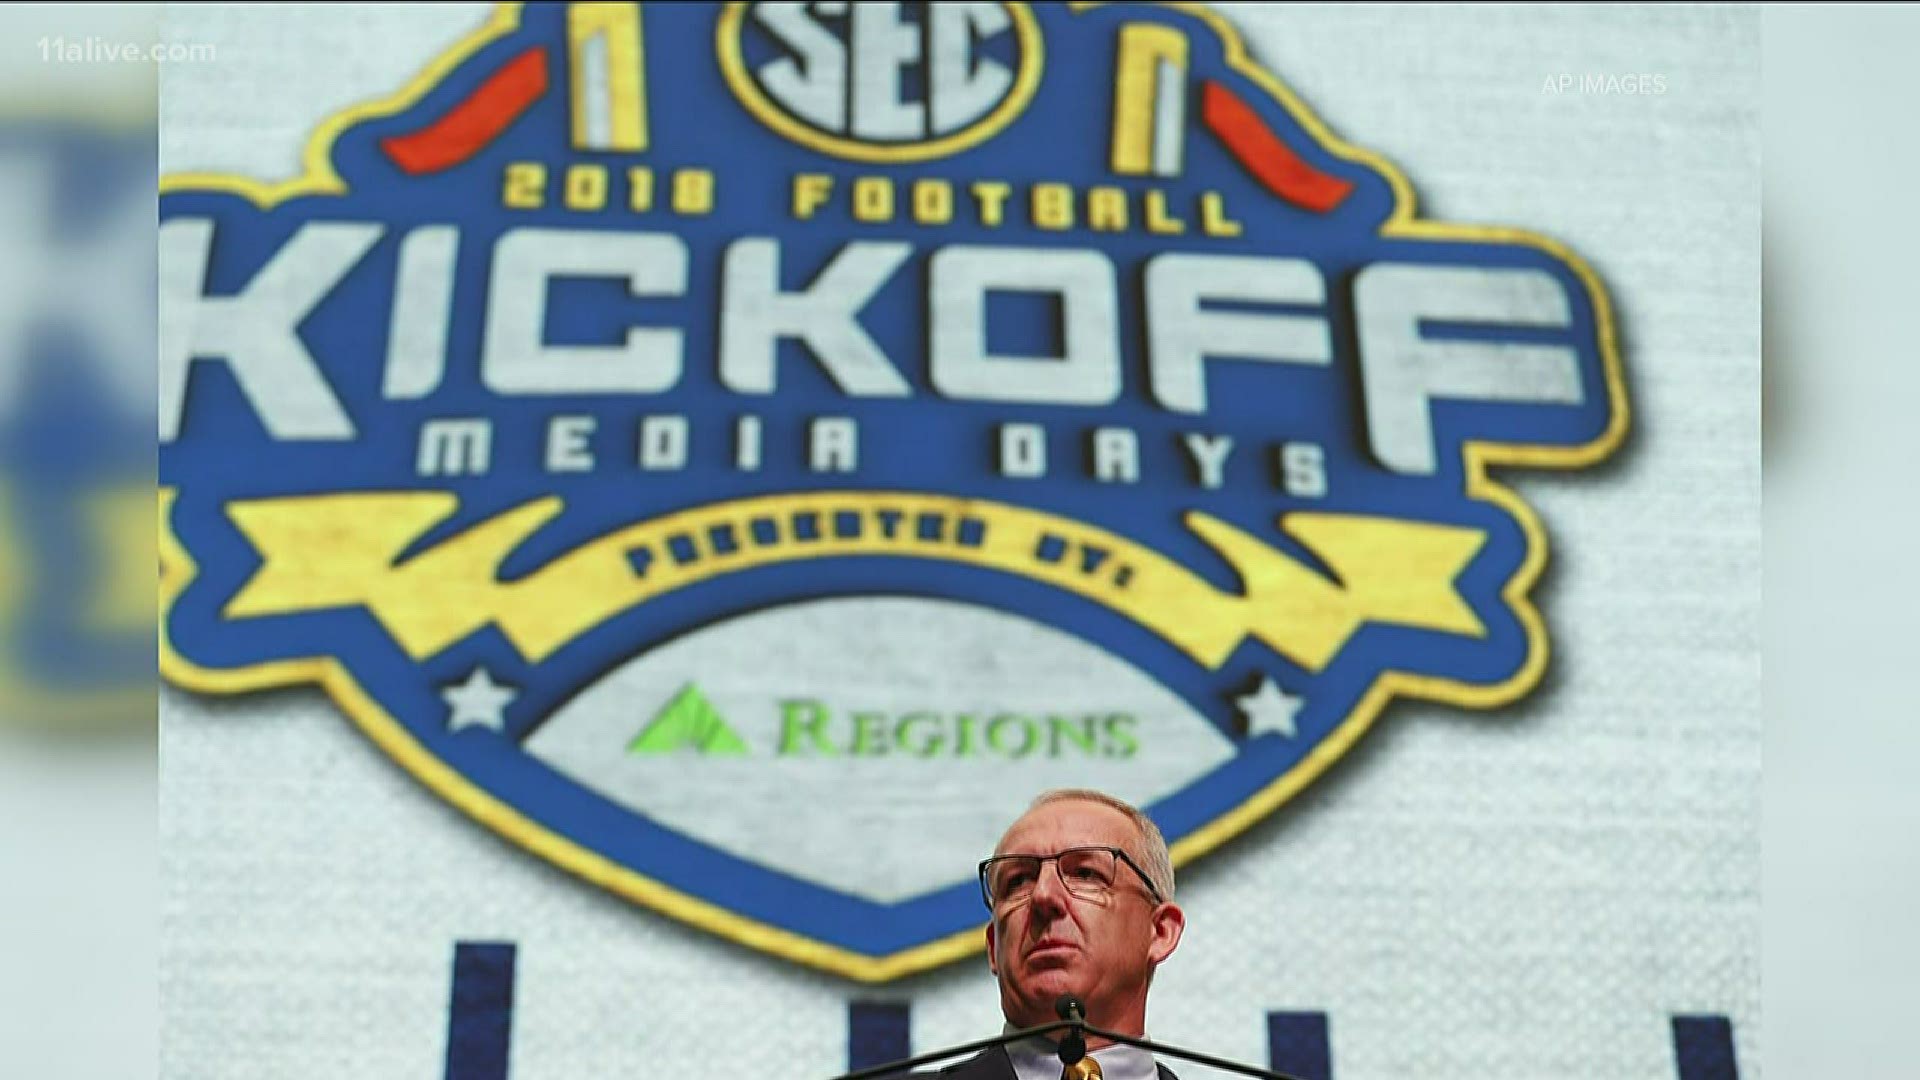 SEC Commissioner Greg Sankey talks about planning constantly while having numerous backup plans. He's cautiously optimistic about SEC Media Day in Atlanta this year.